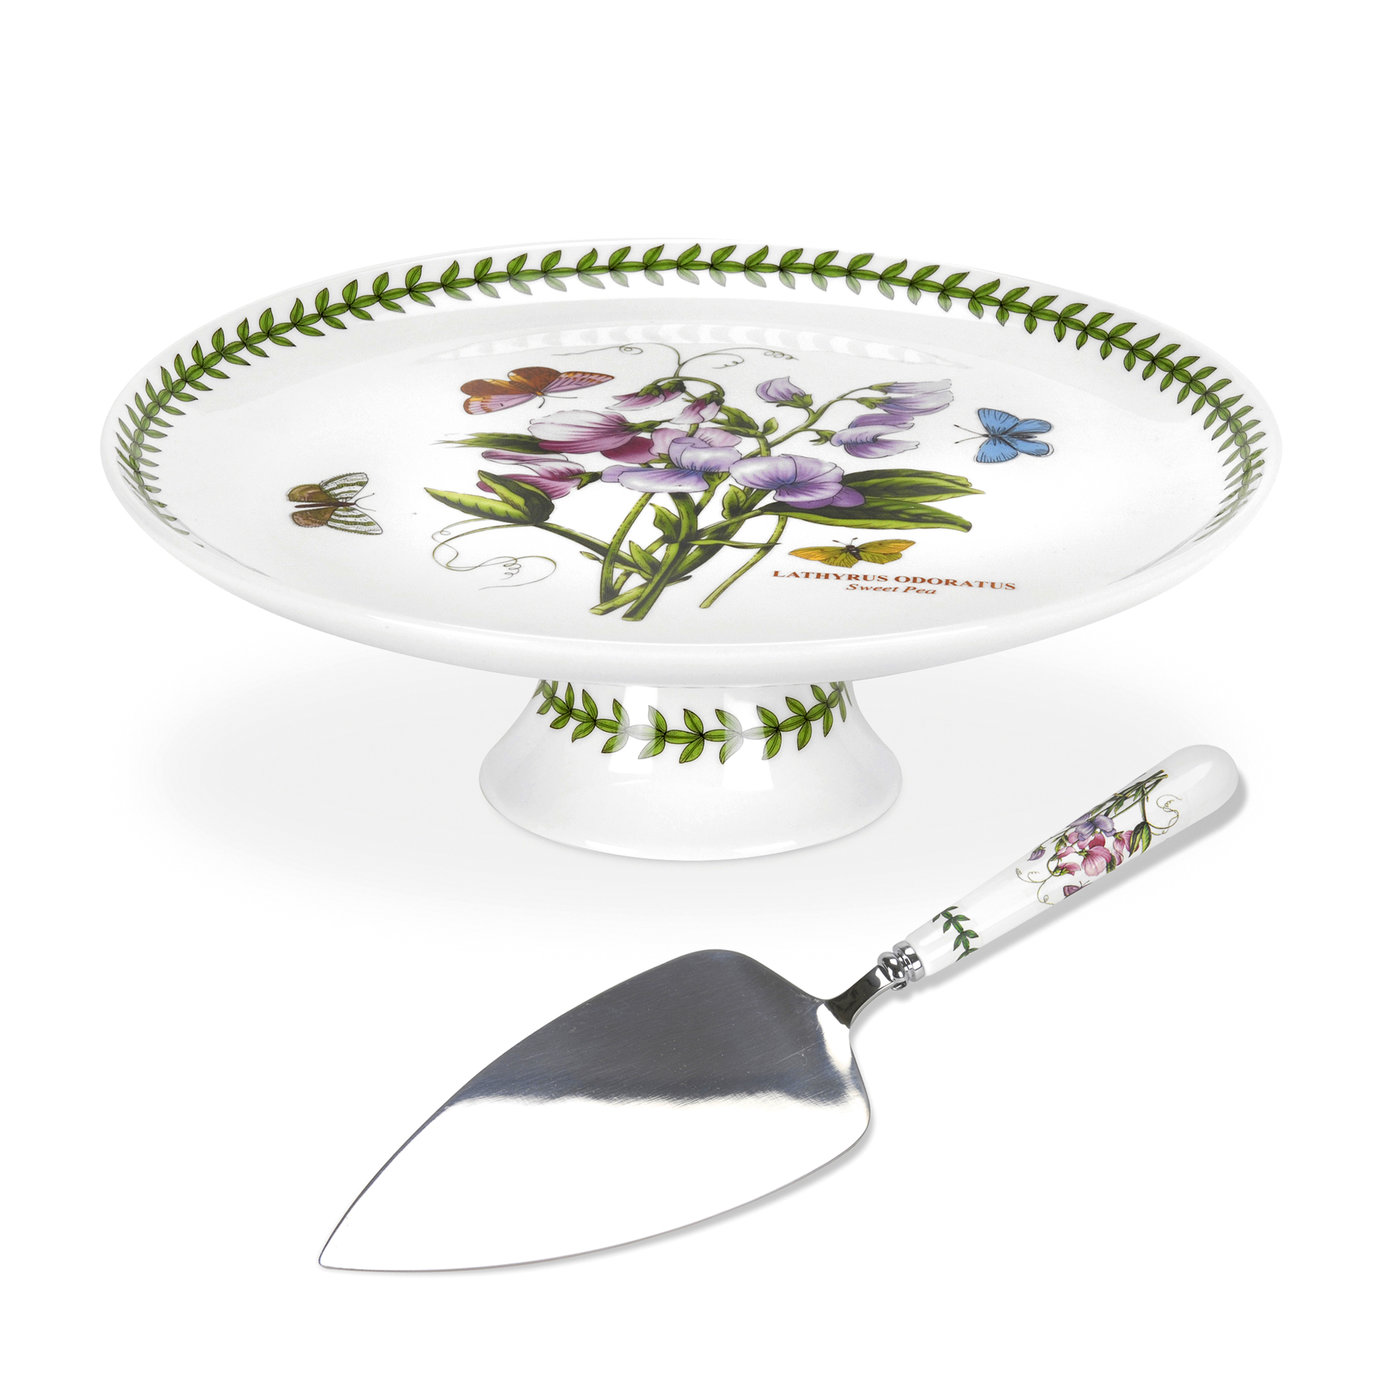 Botanic Garden 10 Inch Footed Cake Plate with Server, Sweet Pea image number null